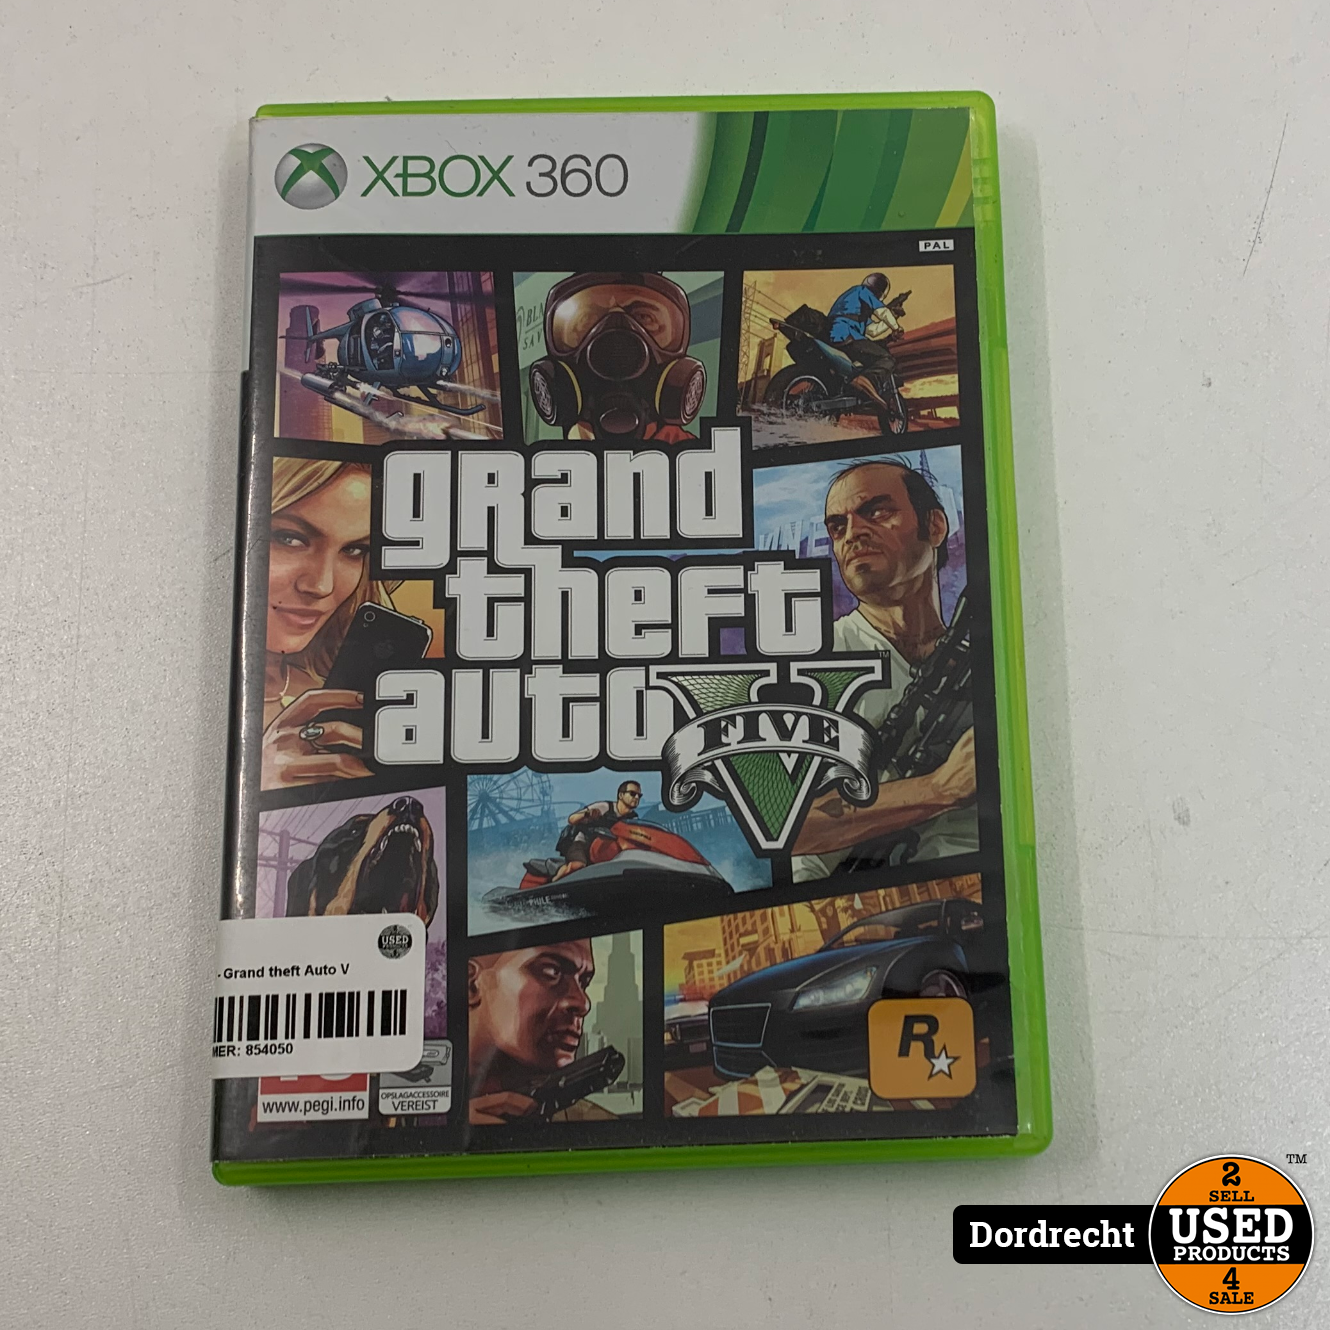 Xbox 360 spel theft Auto V Used Products Dordrecht